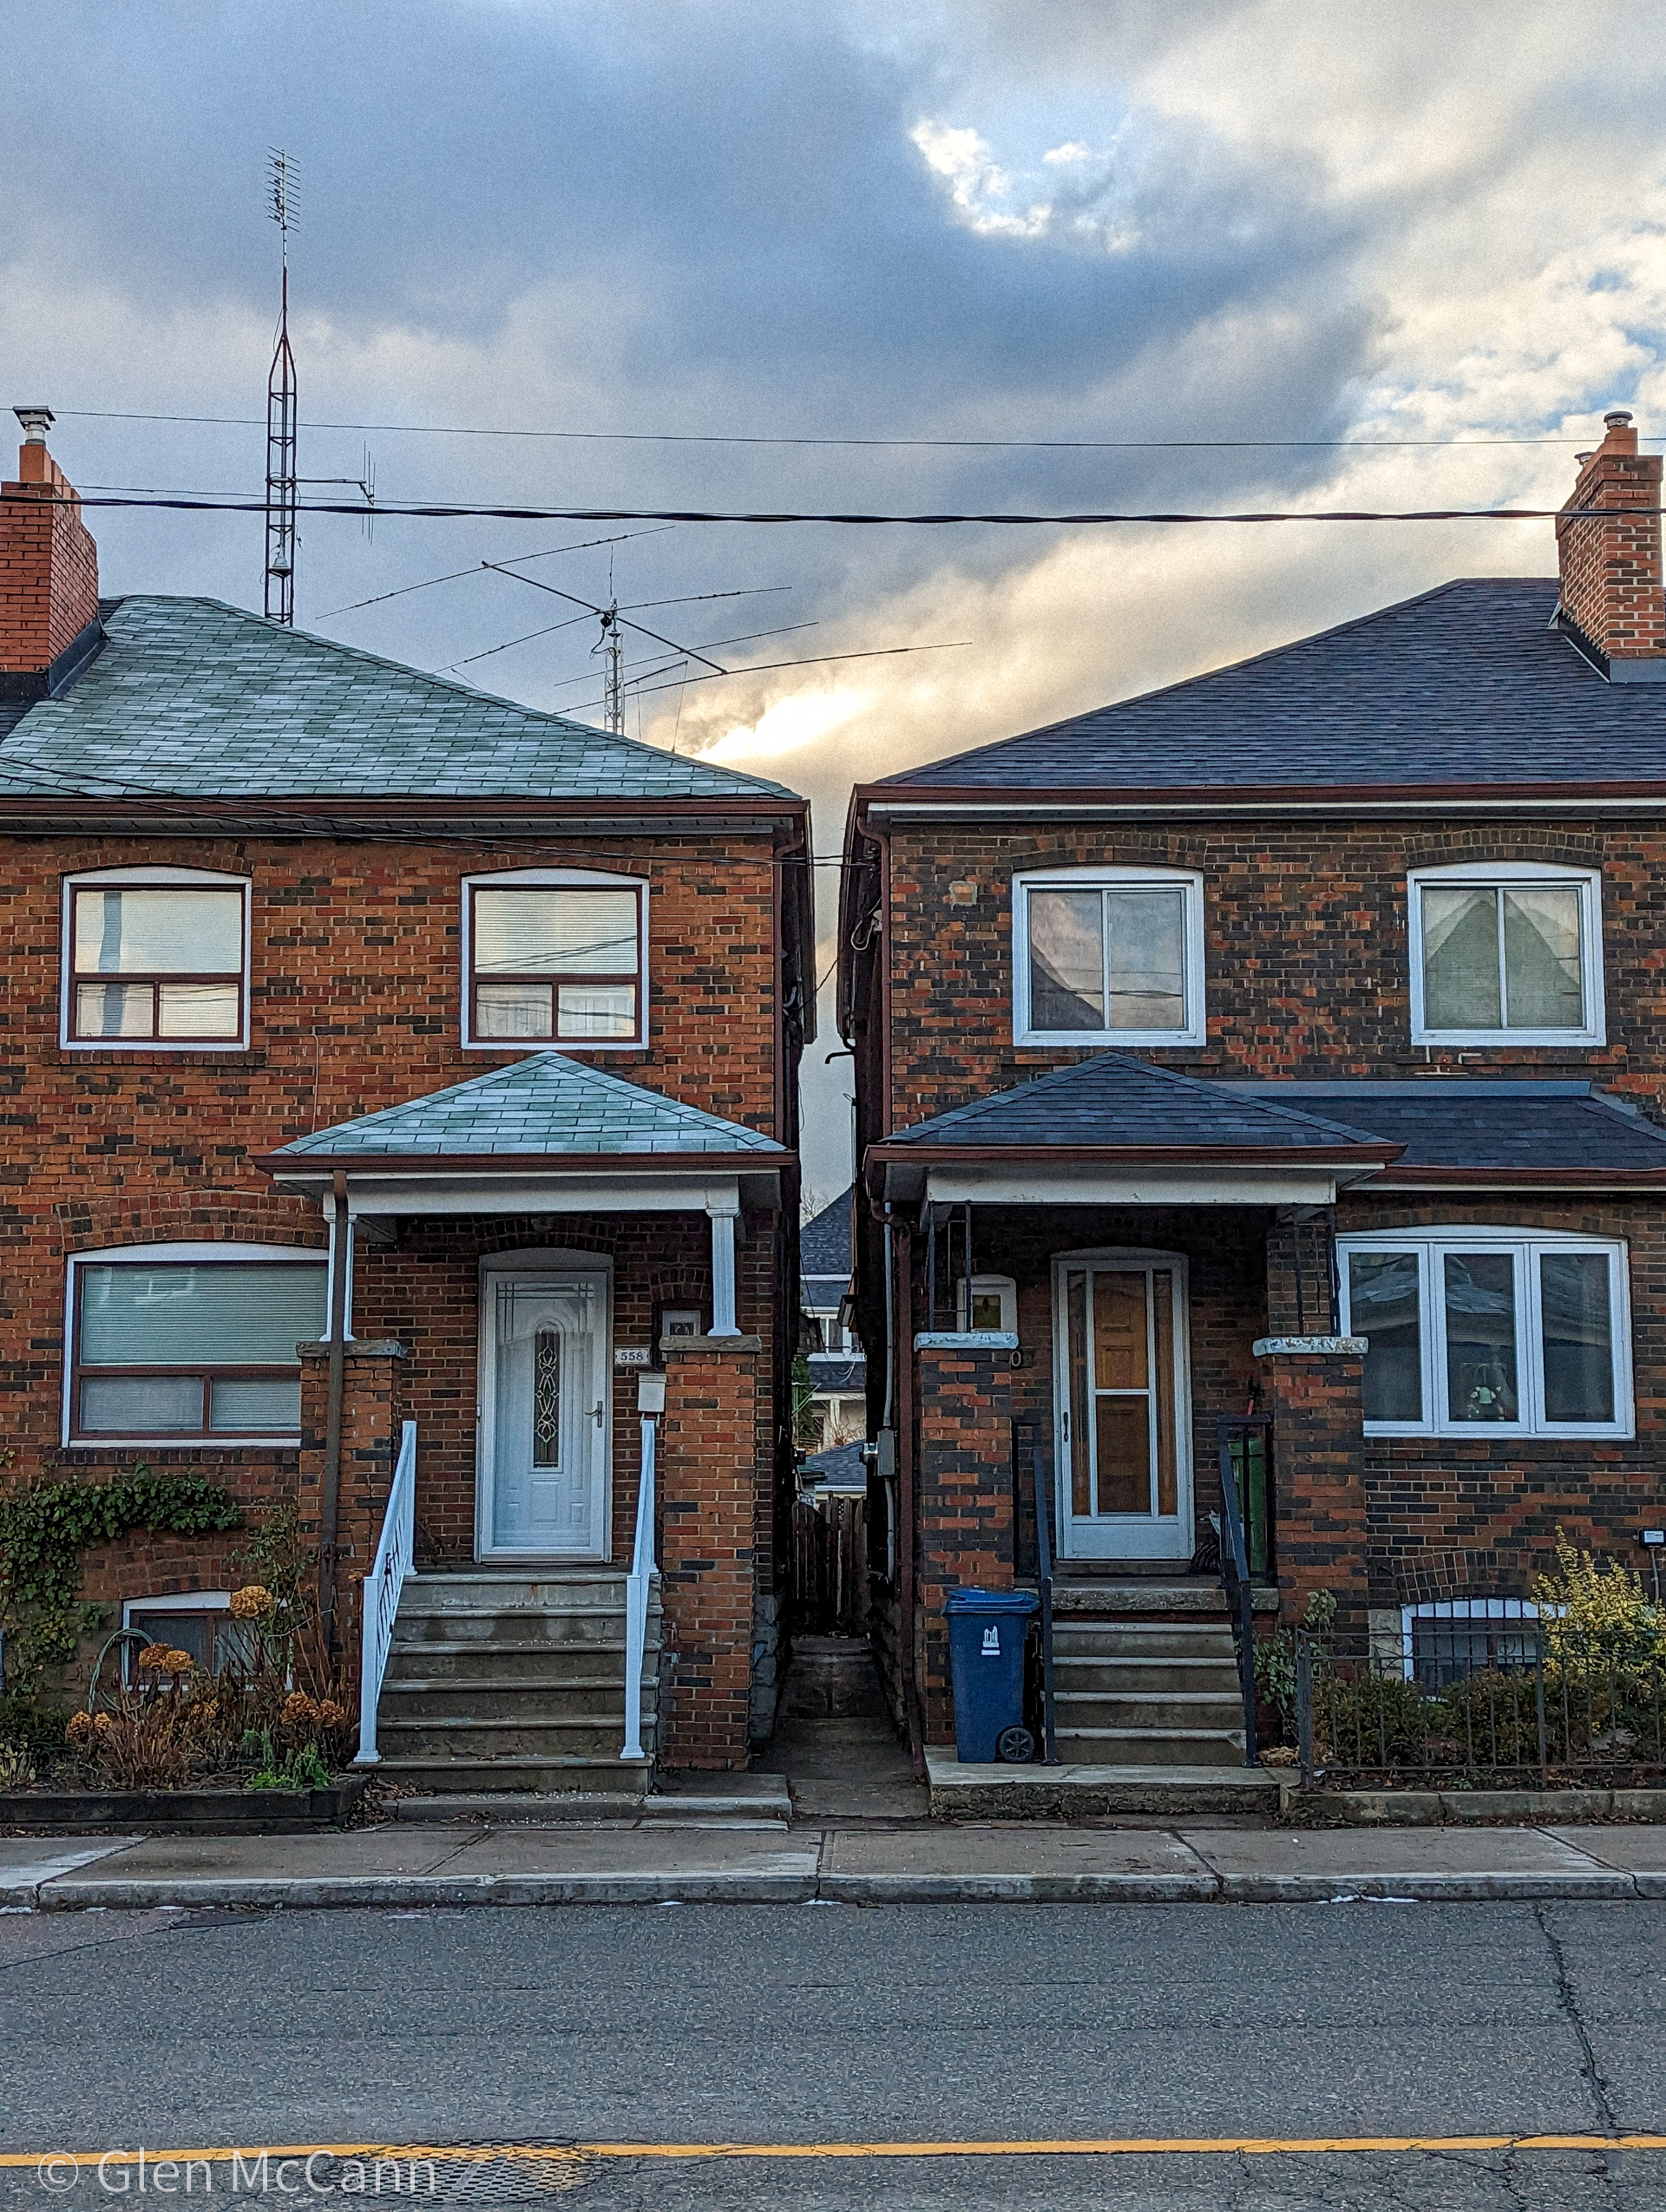 Photo of two very similar houses with a small gap in the middle.